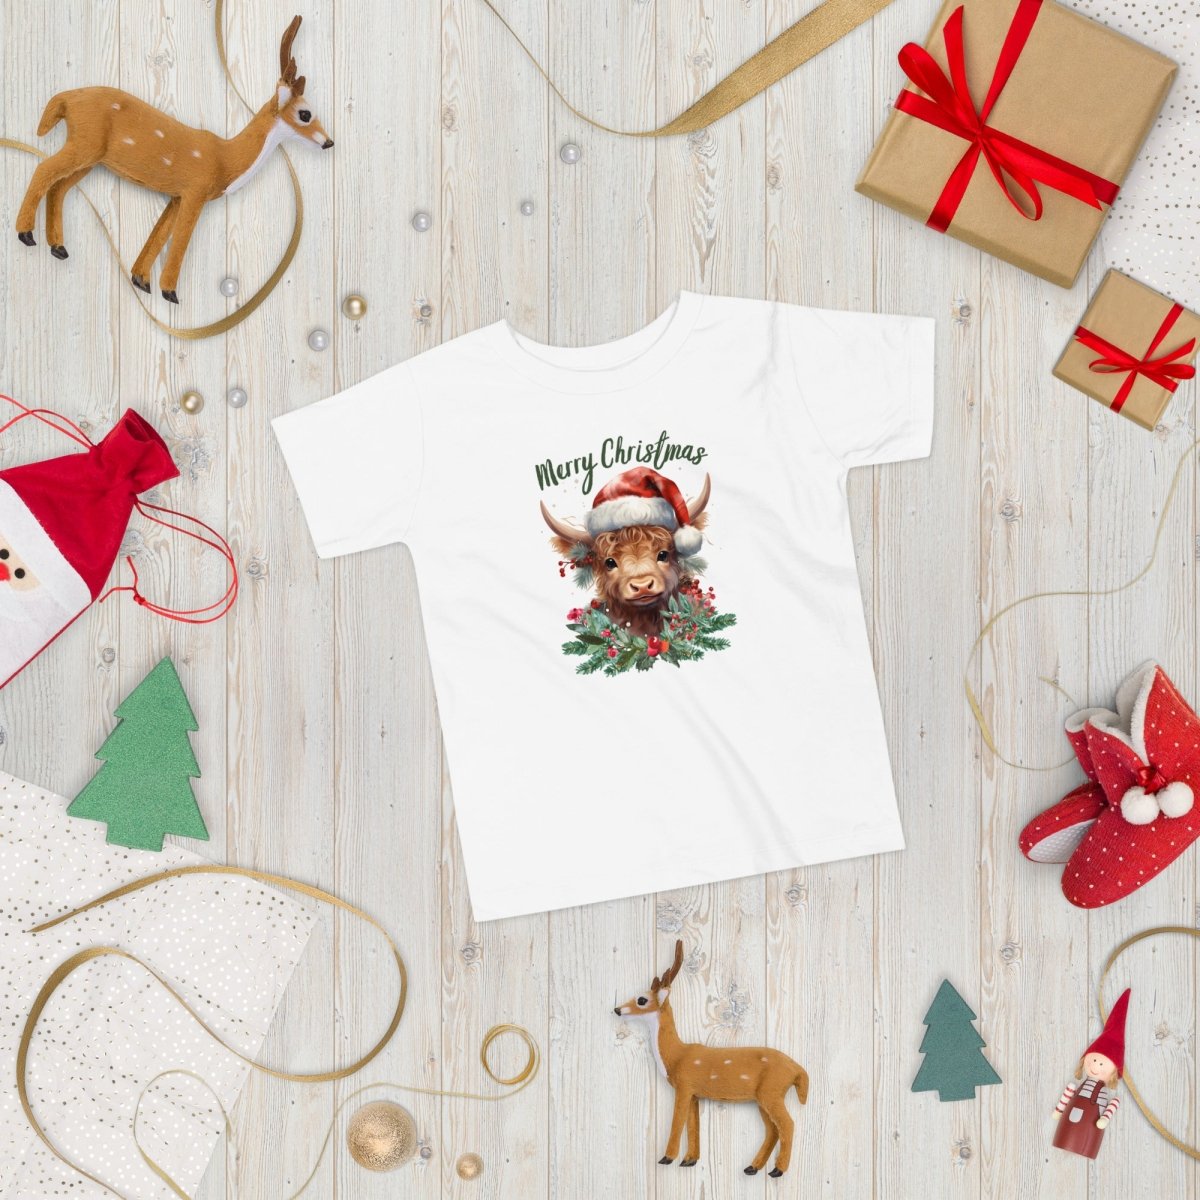 Christmas Highland Cow T-Shirt - High Quality Festive Family Children T-Shirt, Gift for Cow Lovers, Cute Christmas Shirt, Toddler Xmas Tee - Everything Pixel